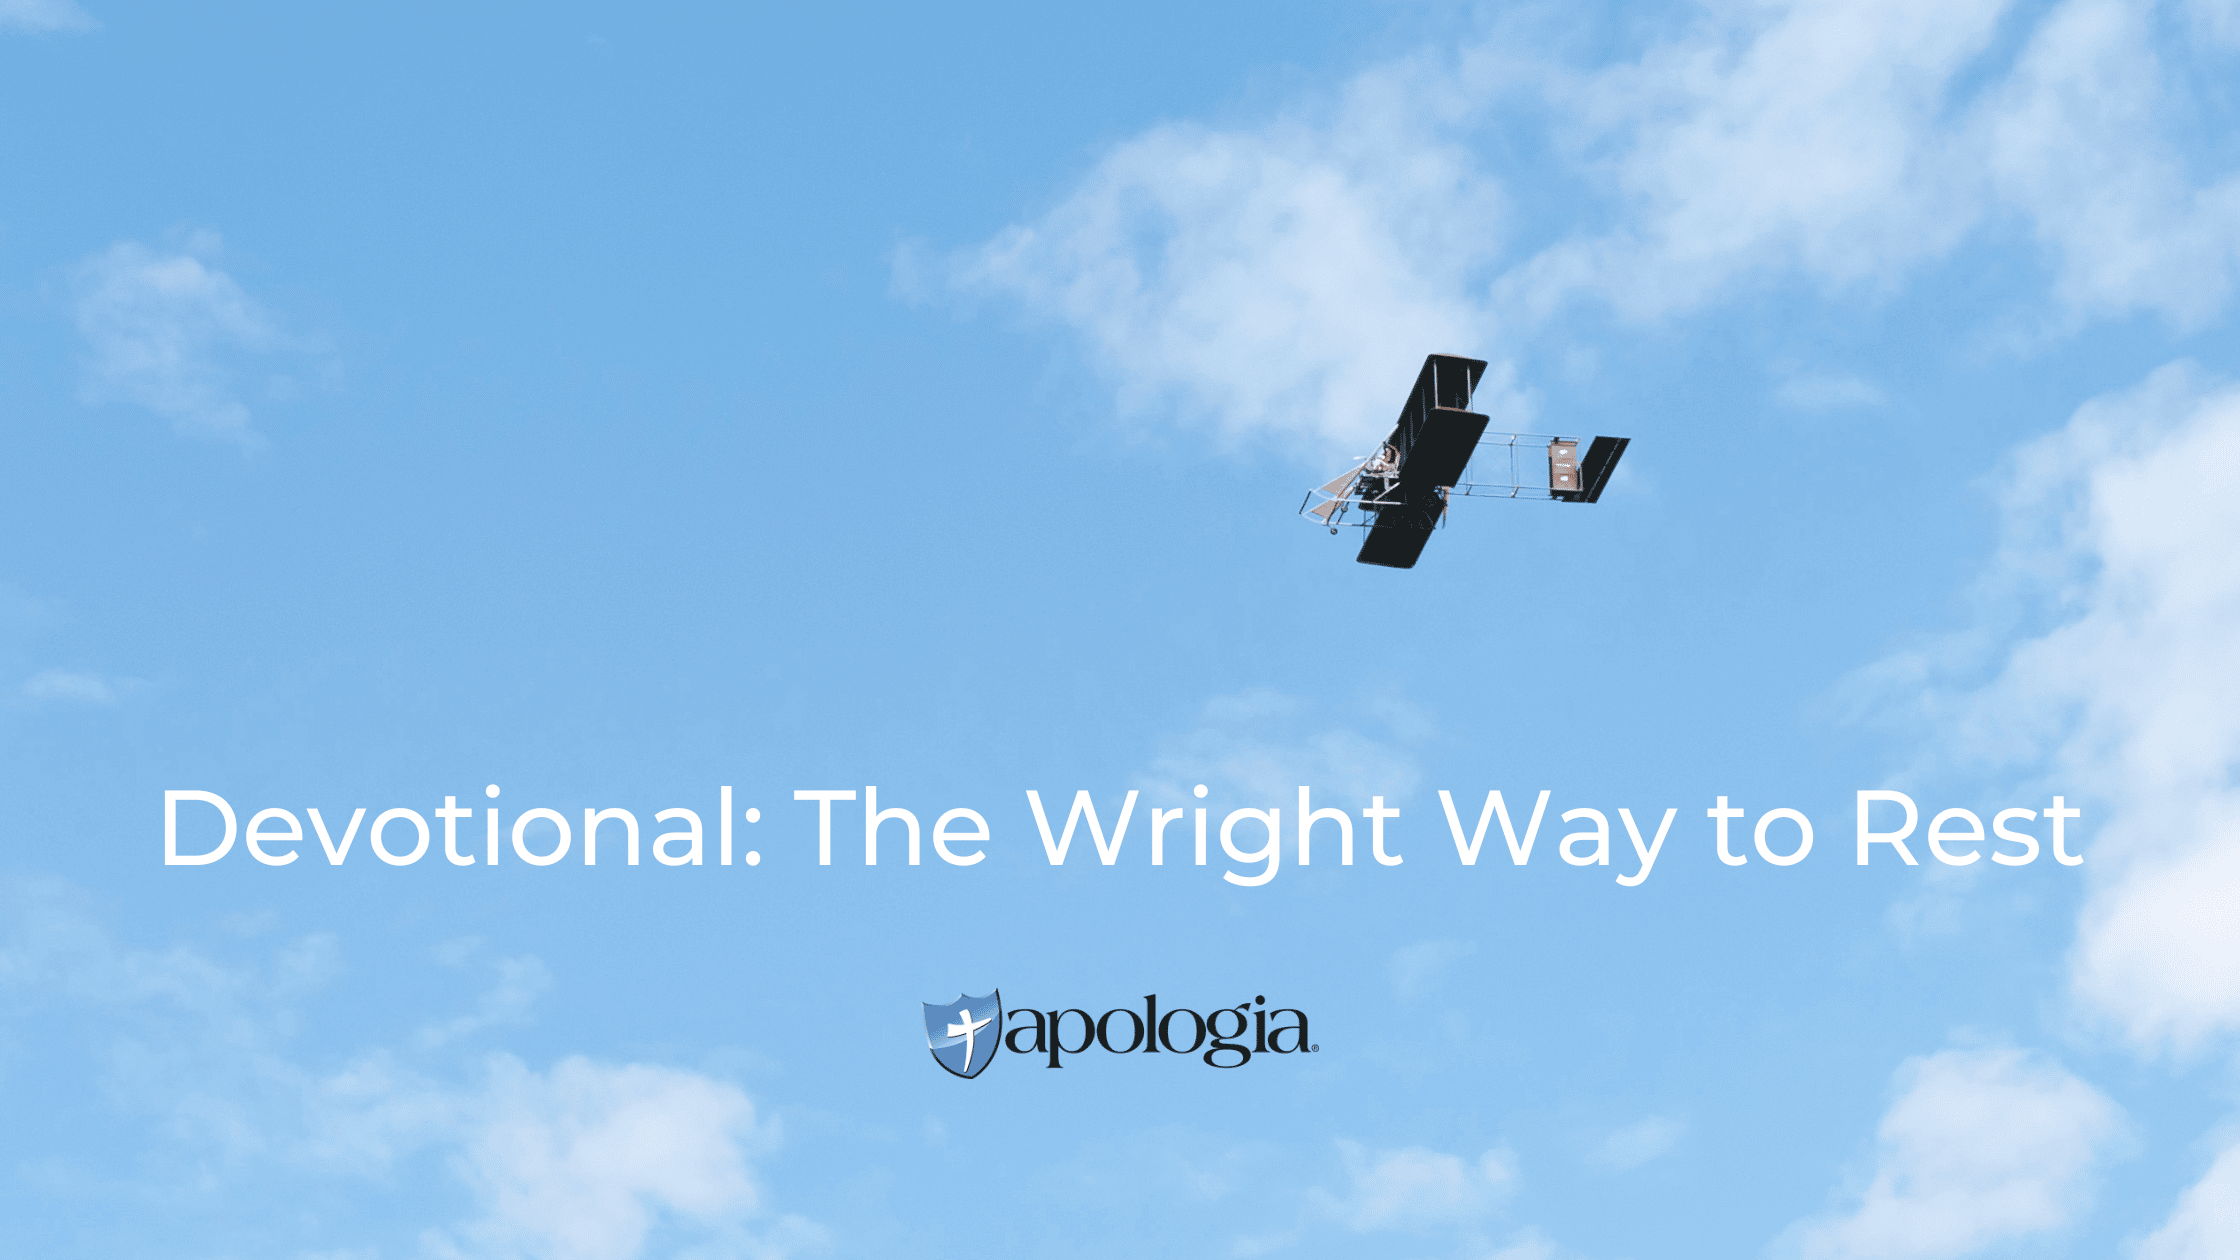 Devotional: The Wright Way to Rest